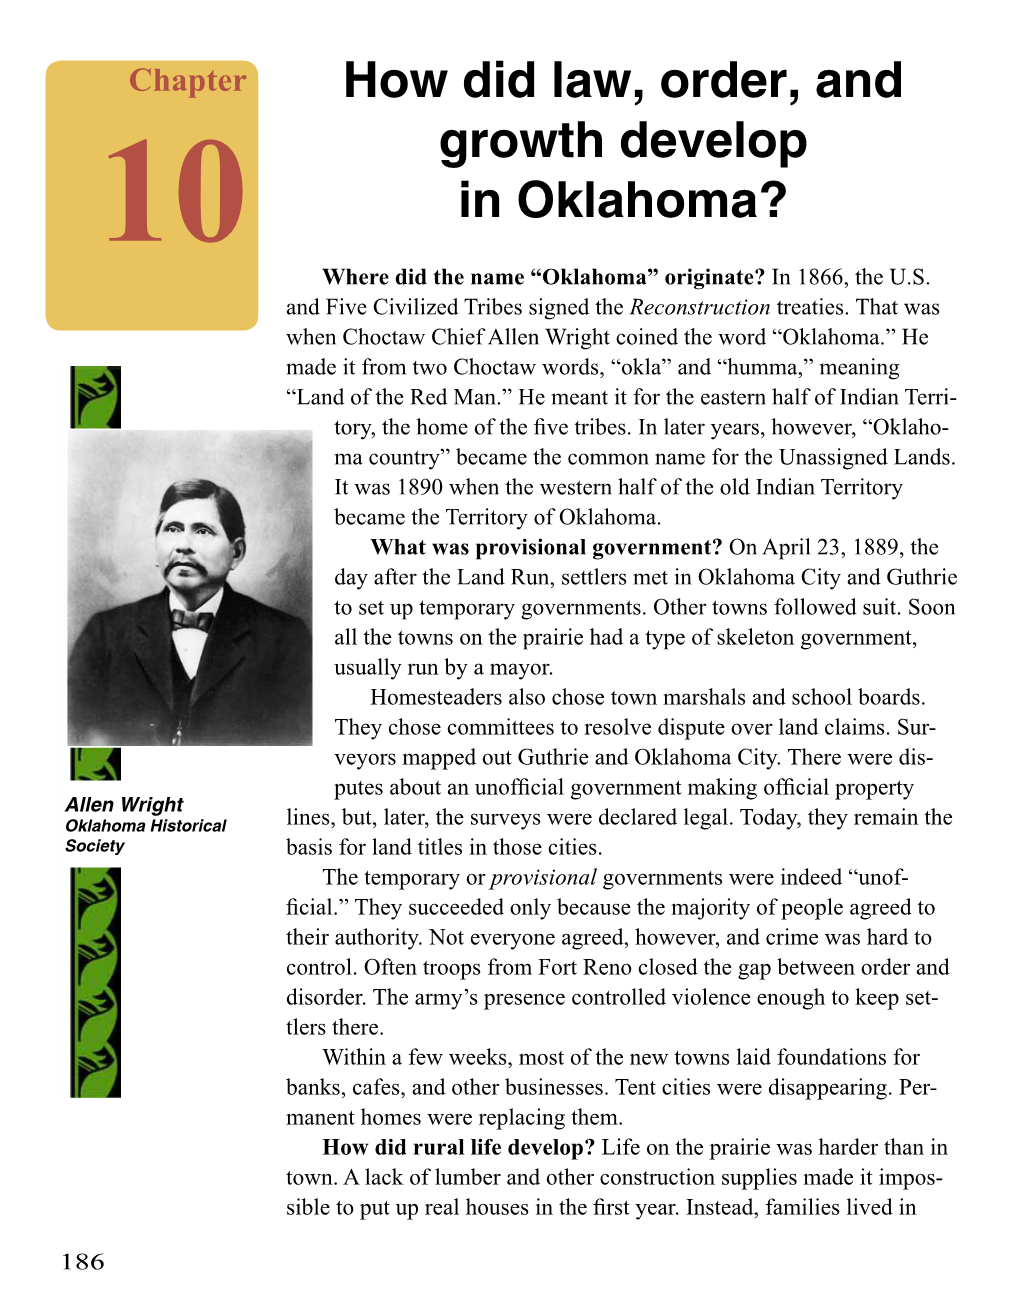 How Did Law, Order, and Growth Develop in Oklahoma?